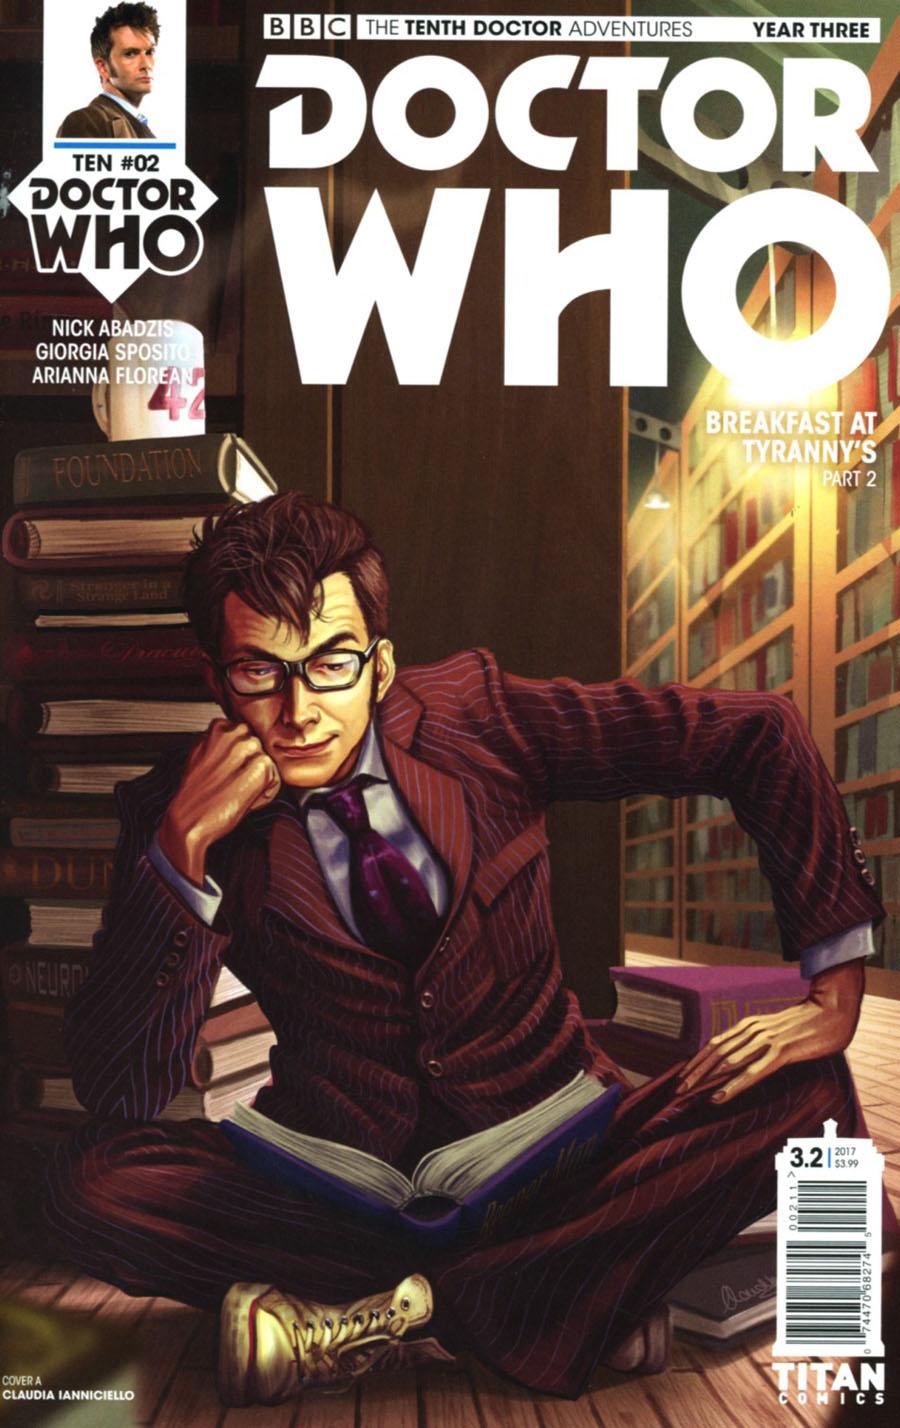 Doctor Who 10th Doctor Year Three Vol. 1 #2